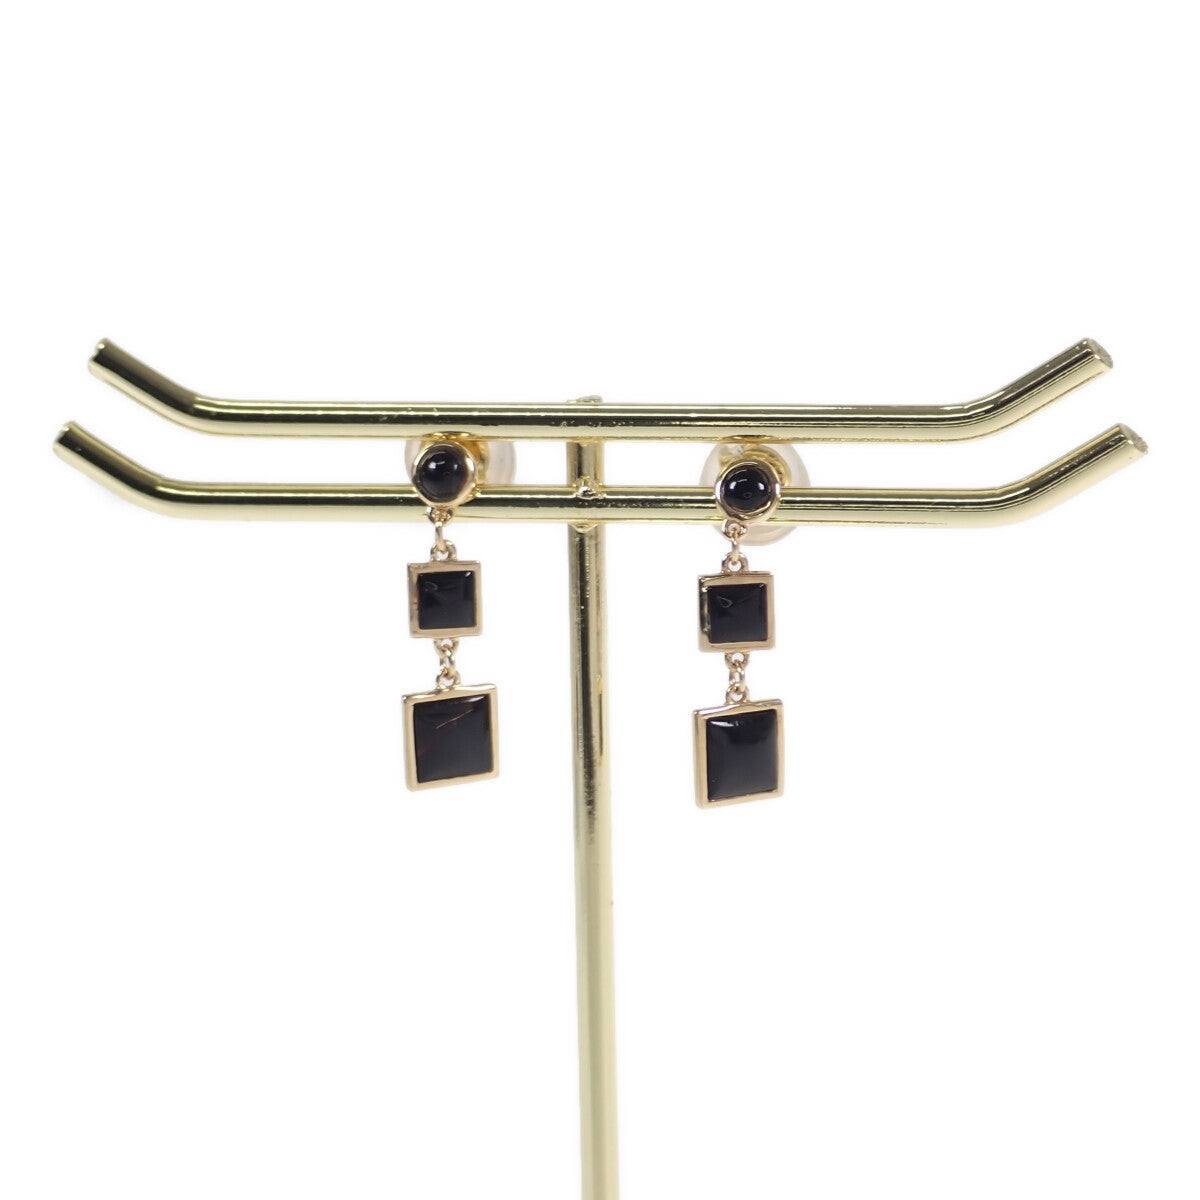 K18 Yellow Gold & Onyx Square Design Earrings for Women - New & Unused